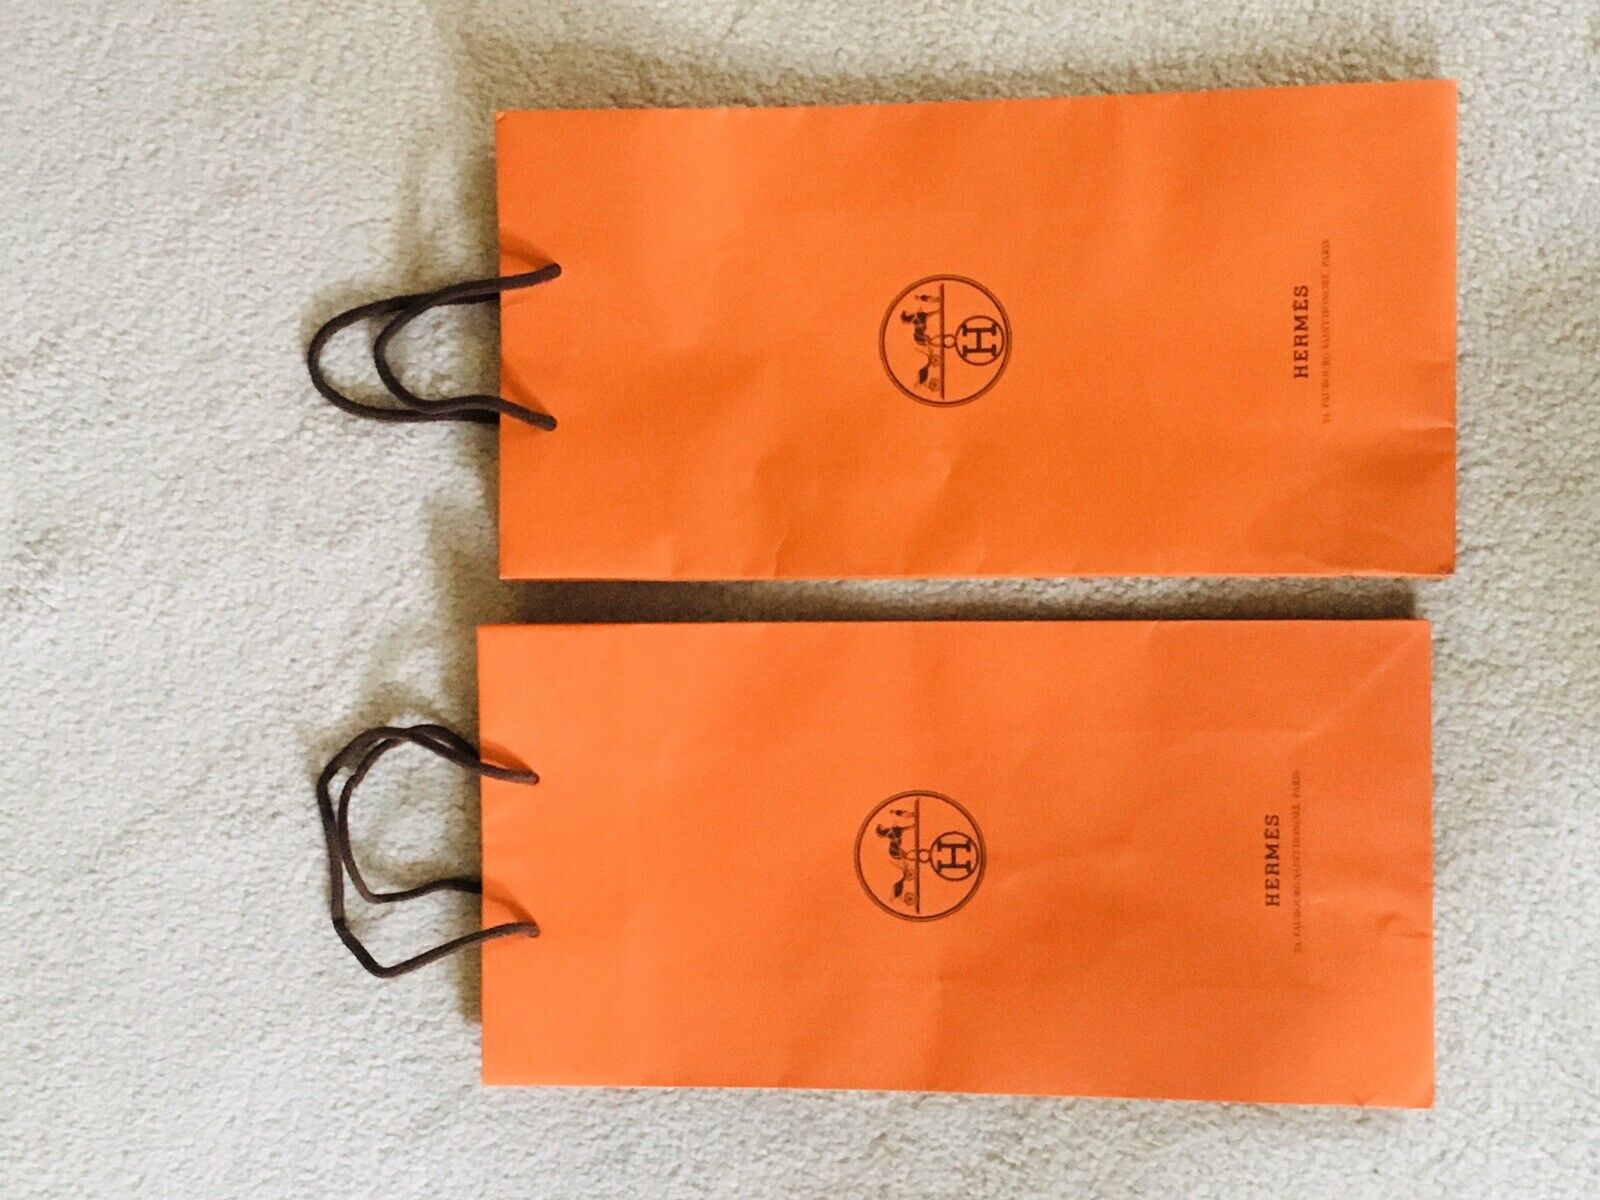 authentic hermes orange shopping bag with ribbon. approx 12x12x4.